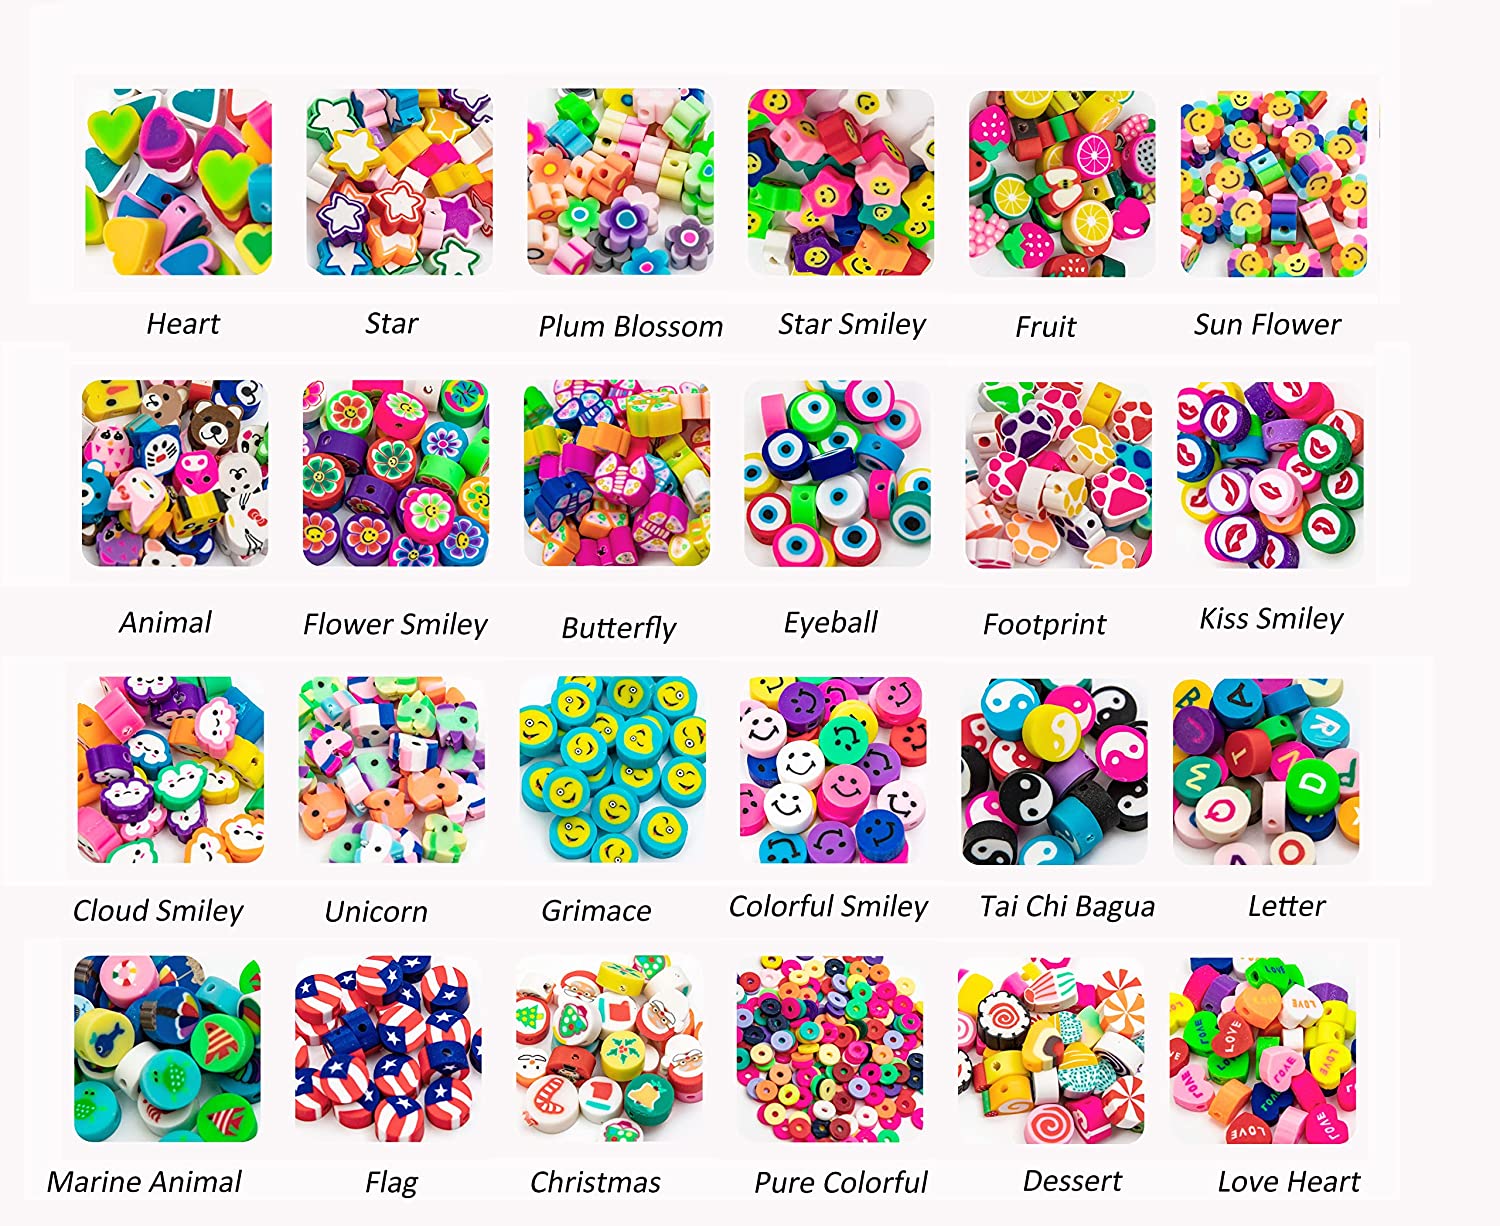 666PCS Flower Smiley Polymer Clay Beads Charms 24 Styles Cool Fun